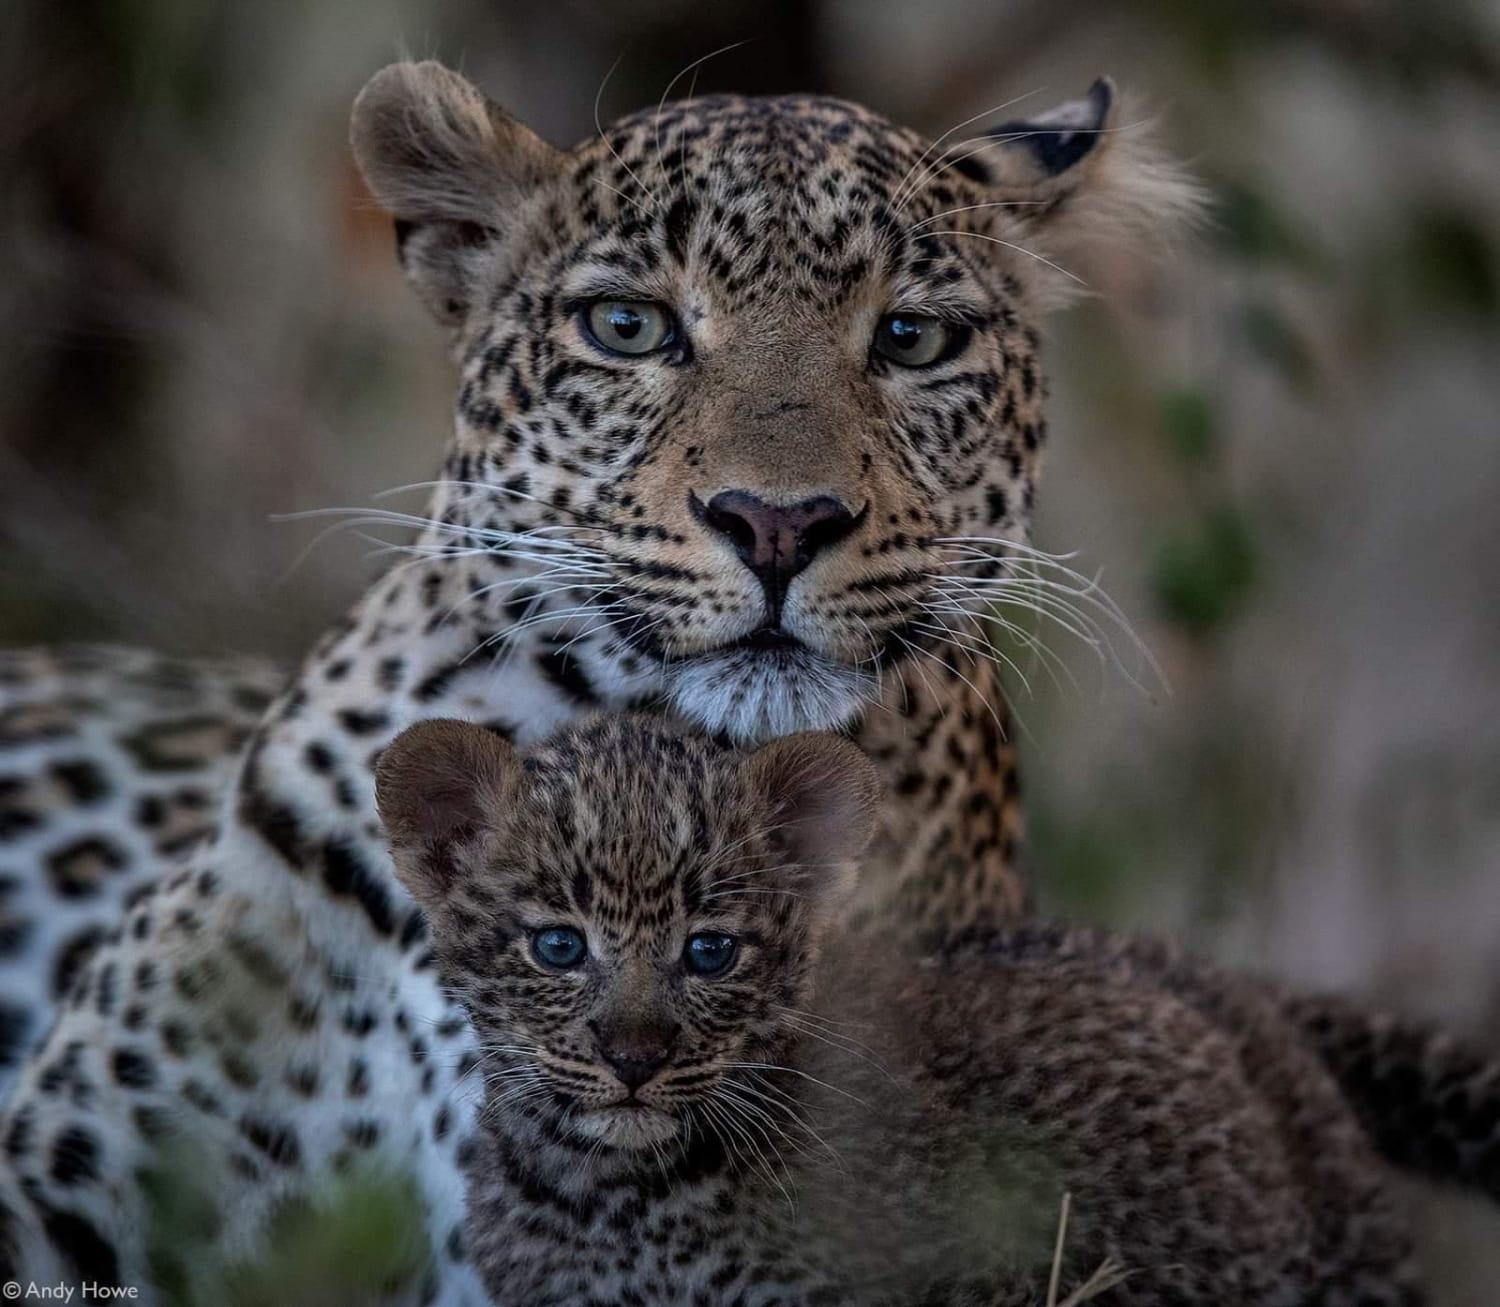 Cute leopard cub with mum - credit: Andy Howe